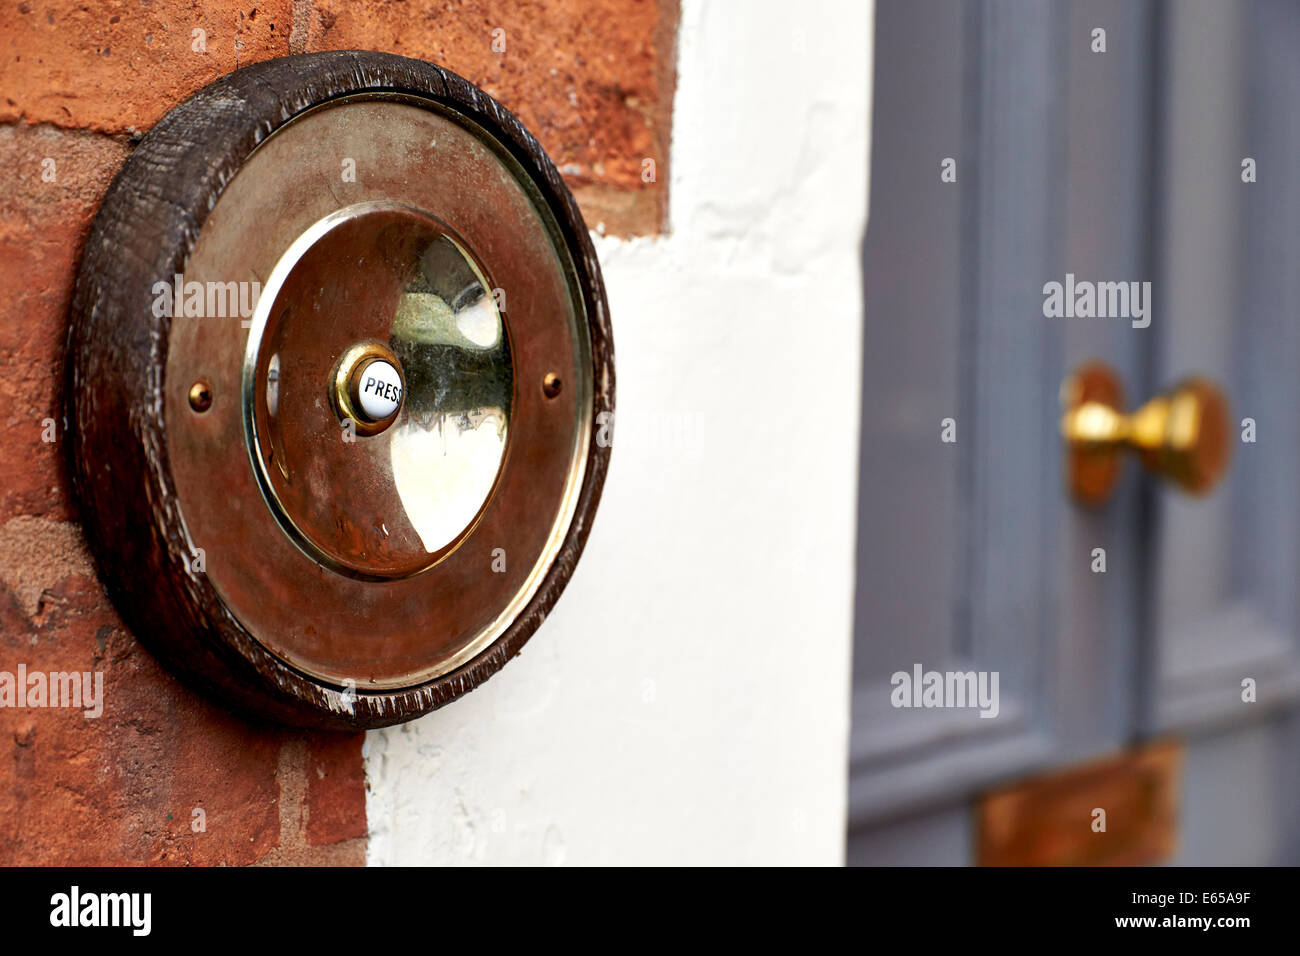 An old fashioned doorbell pictured next to a house front door. Stock Photo